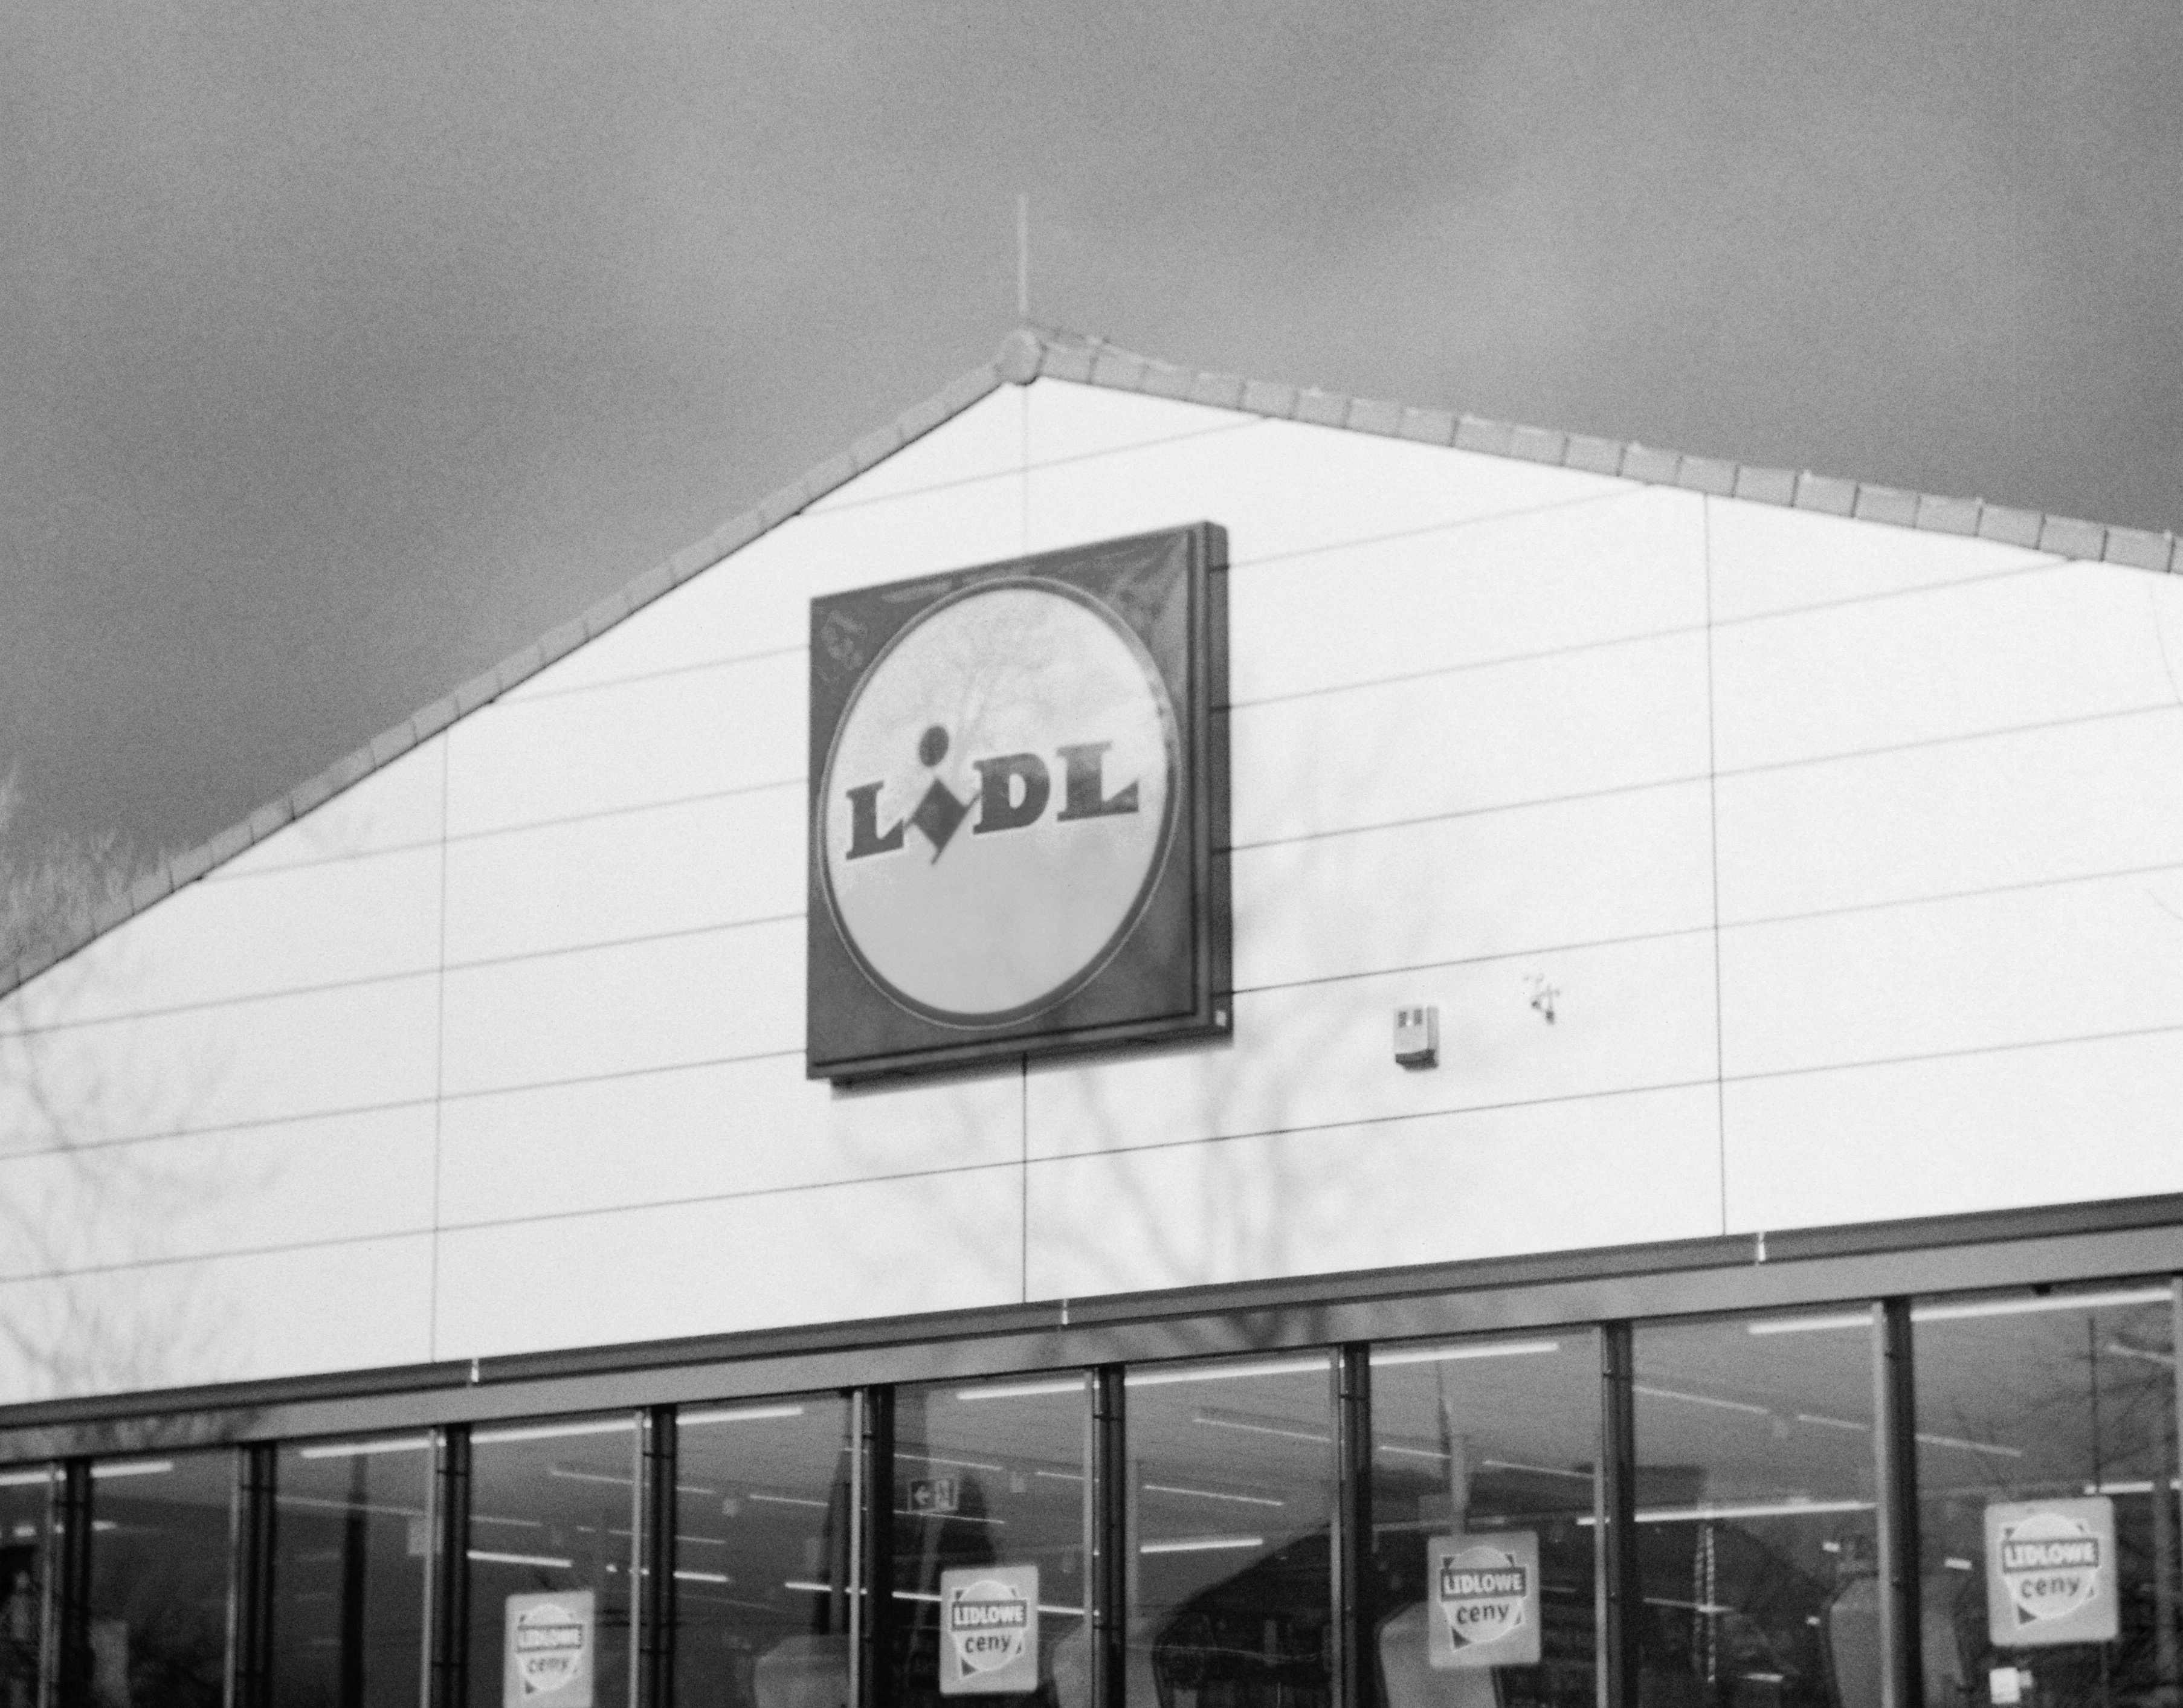 A Lidl trade mark goes a long way...